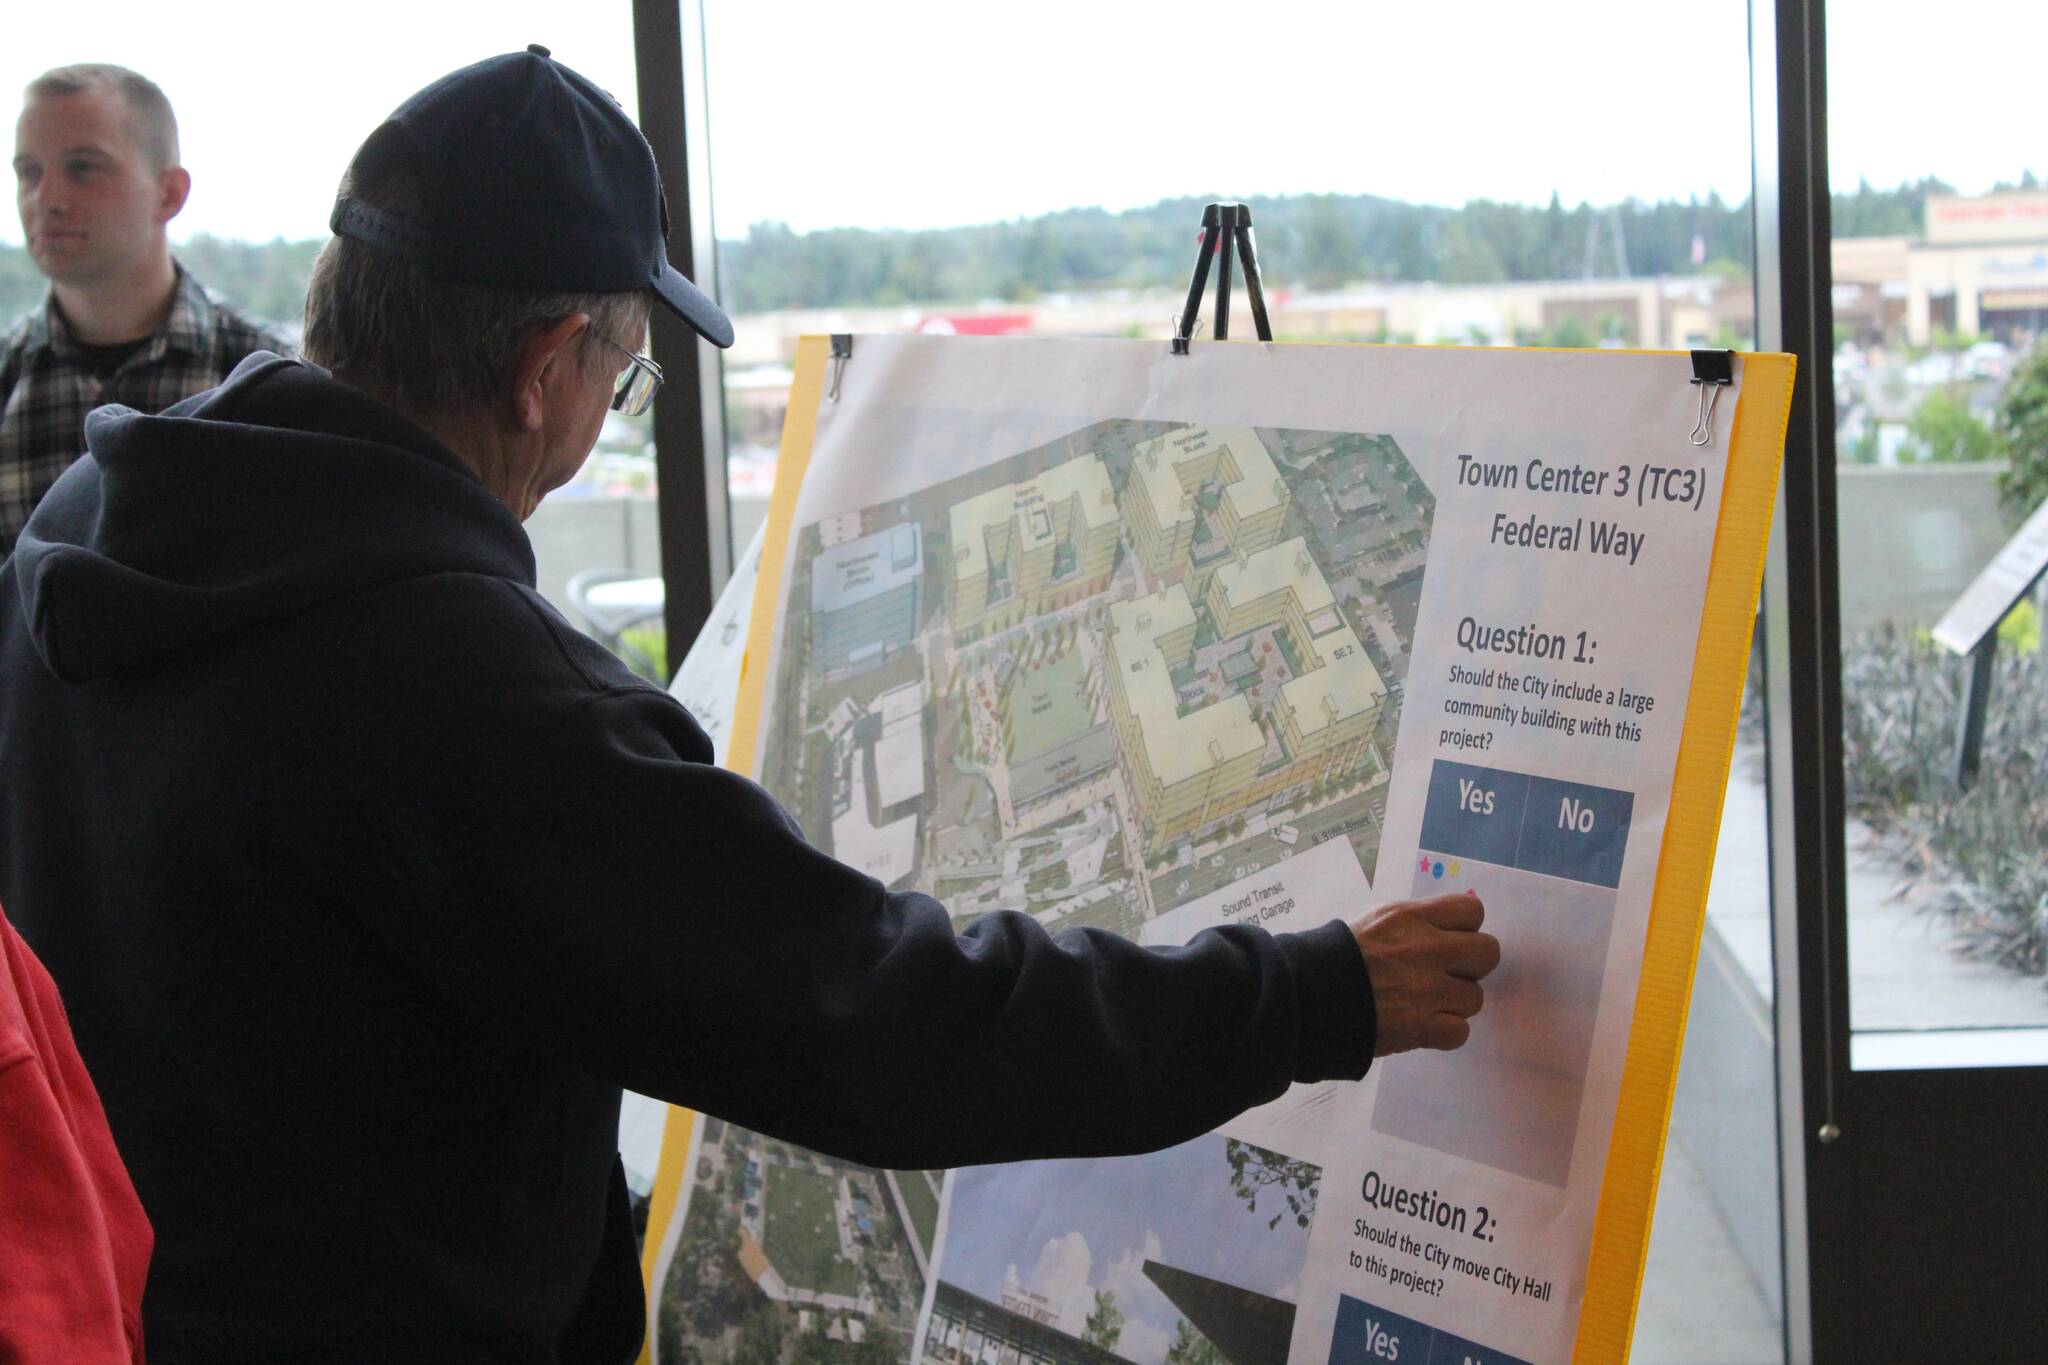 Visitors to the “Rising from The Dust” event share their thoughts on whether Federal Way should invest in a community building or a new City Hall at the upcoming TC-3 project. Alex Bruell / The Mirror